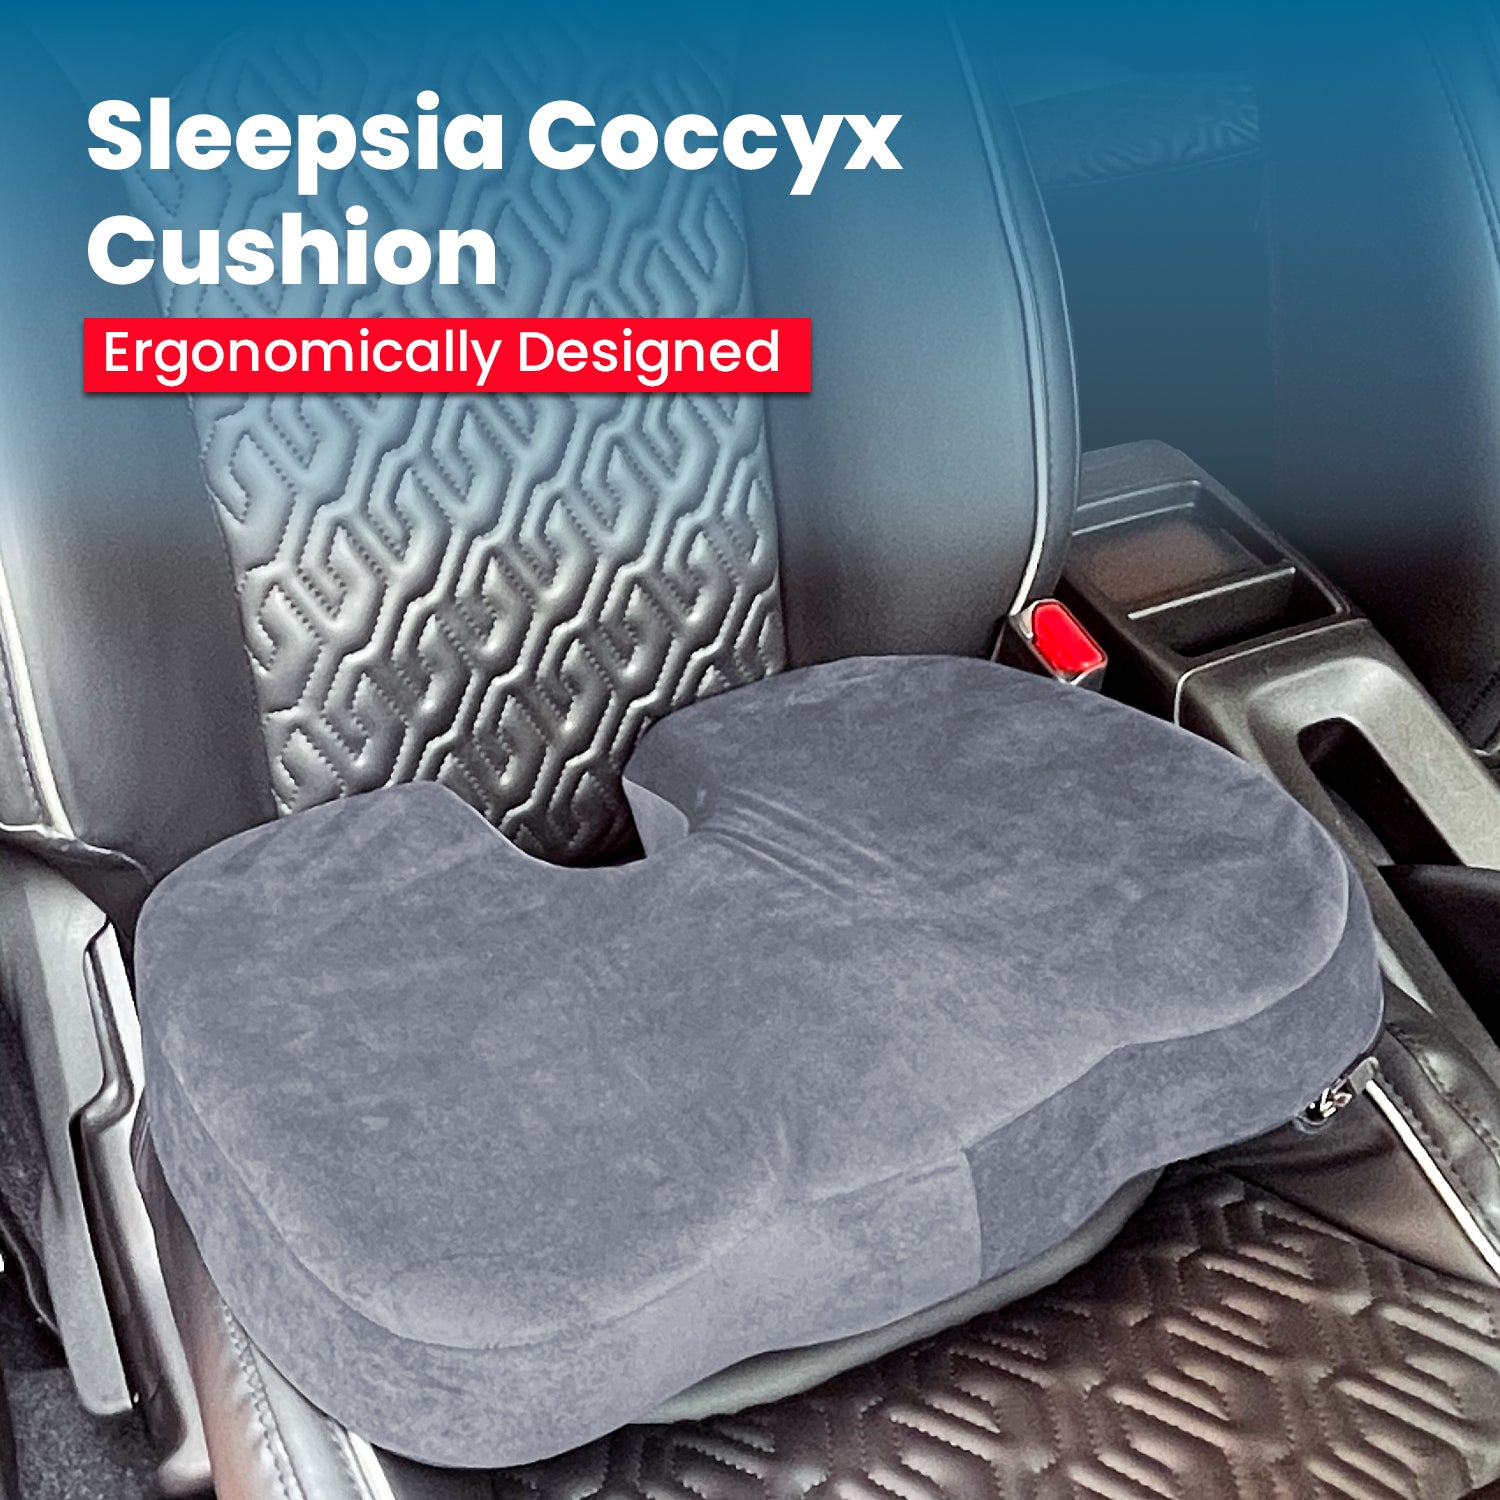 Orthopedic Memory Foam U-Shaped Coccyx Seat Cushion with Ventilated Cooling Gel for Tailbone, Sciatica & Back Pain Relief